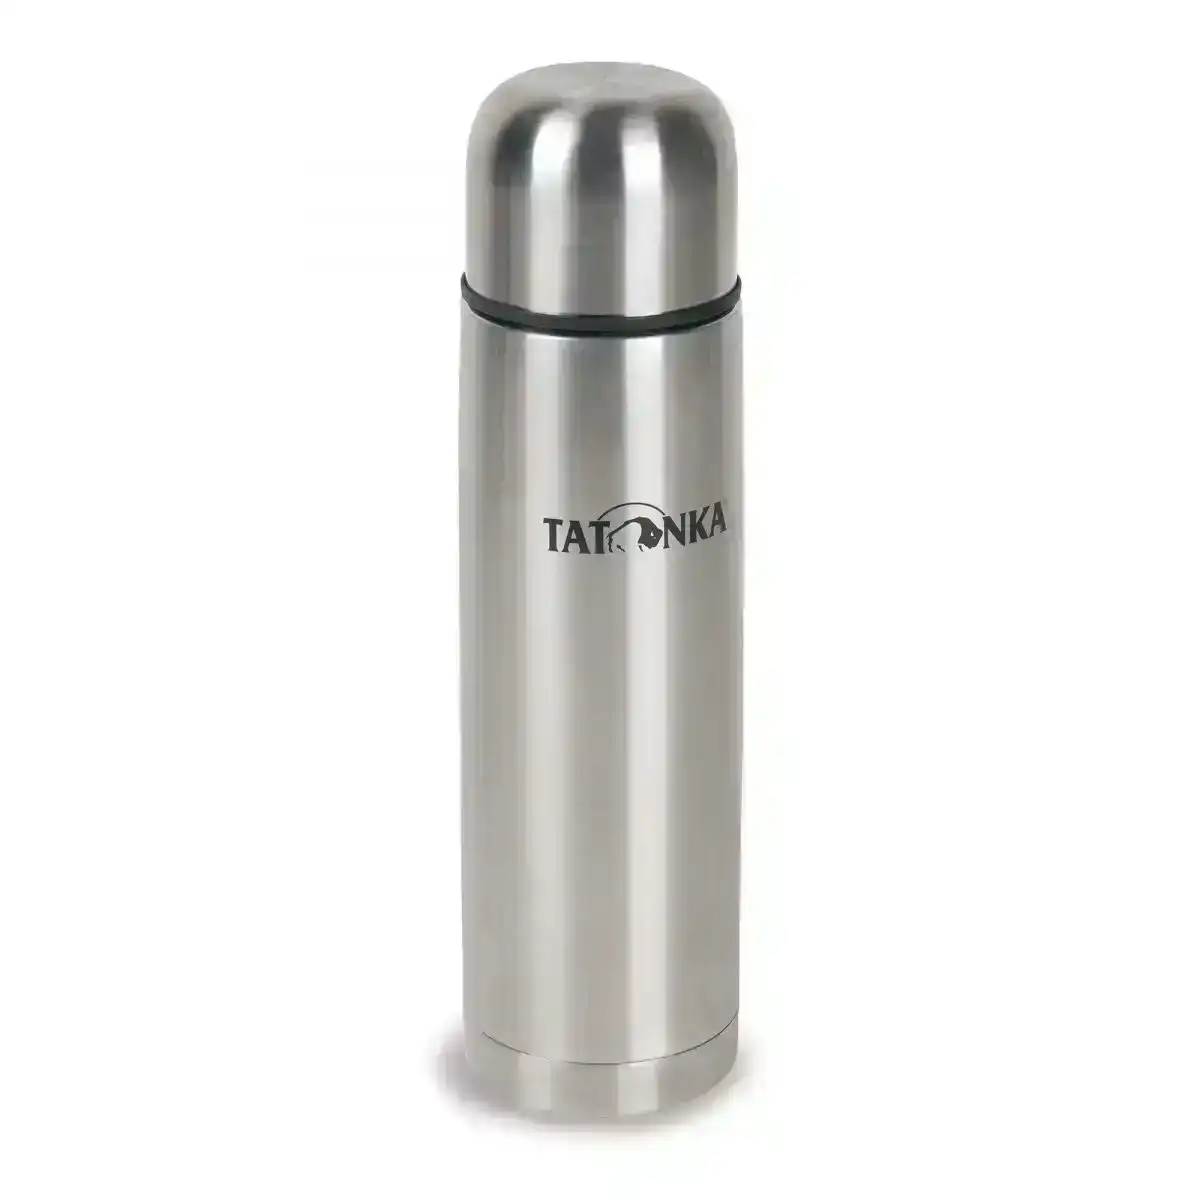 Tatonka 1L Hot & Cold Stuff Stainless Steel Flask/Vaccum Insulated Drink Bottle